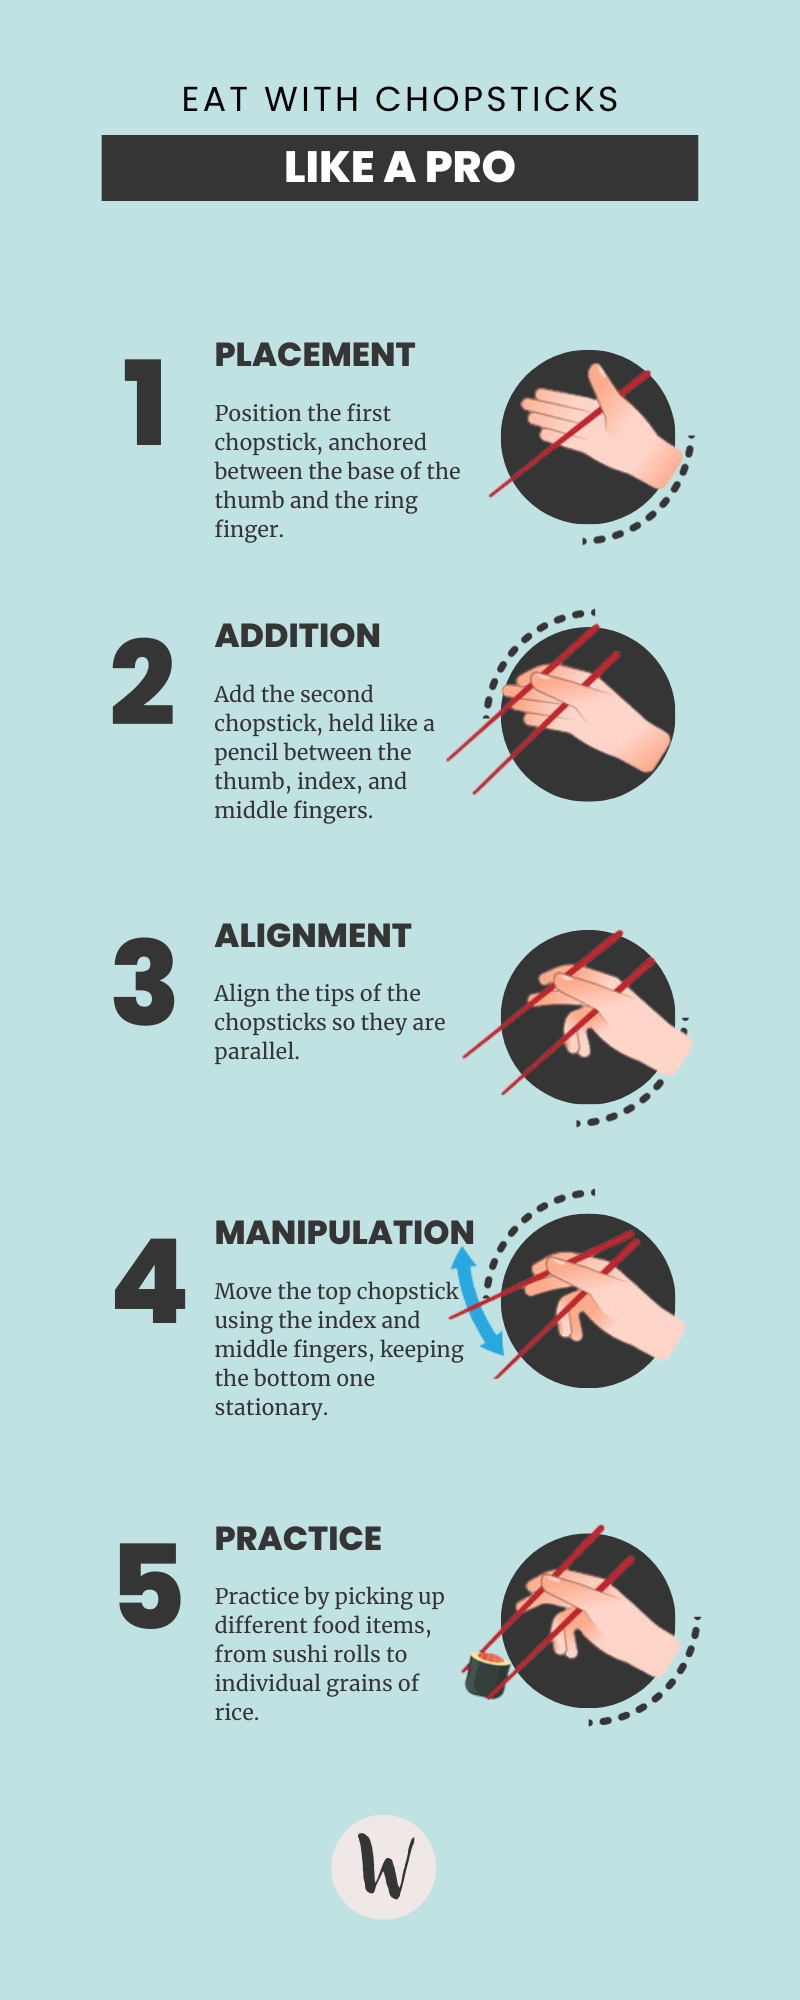 How to Eat With Chopsticks Infographic